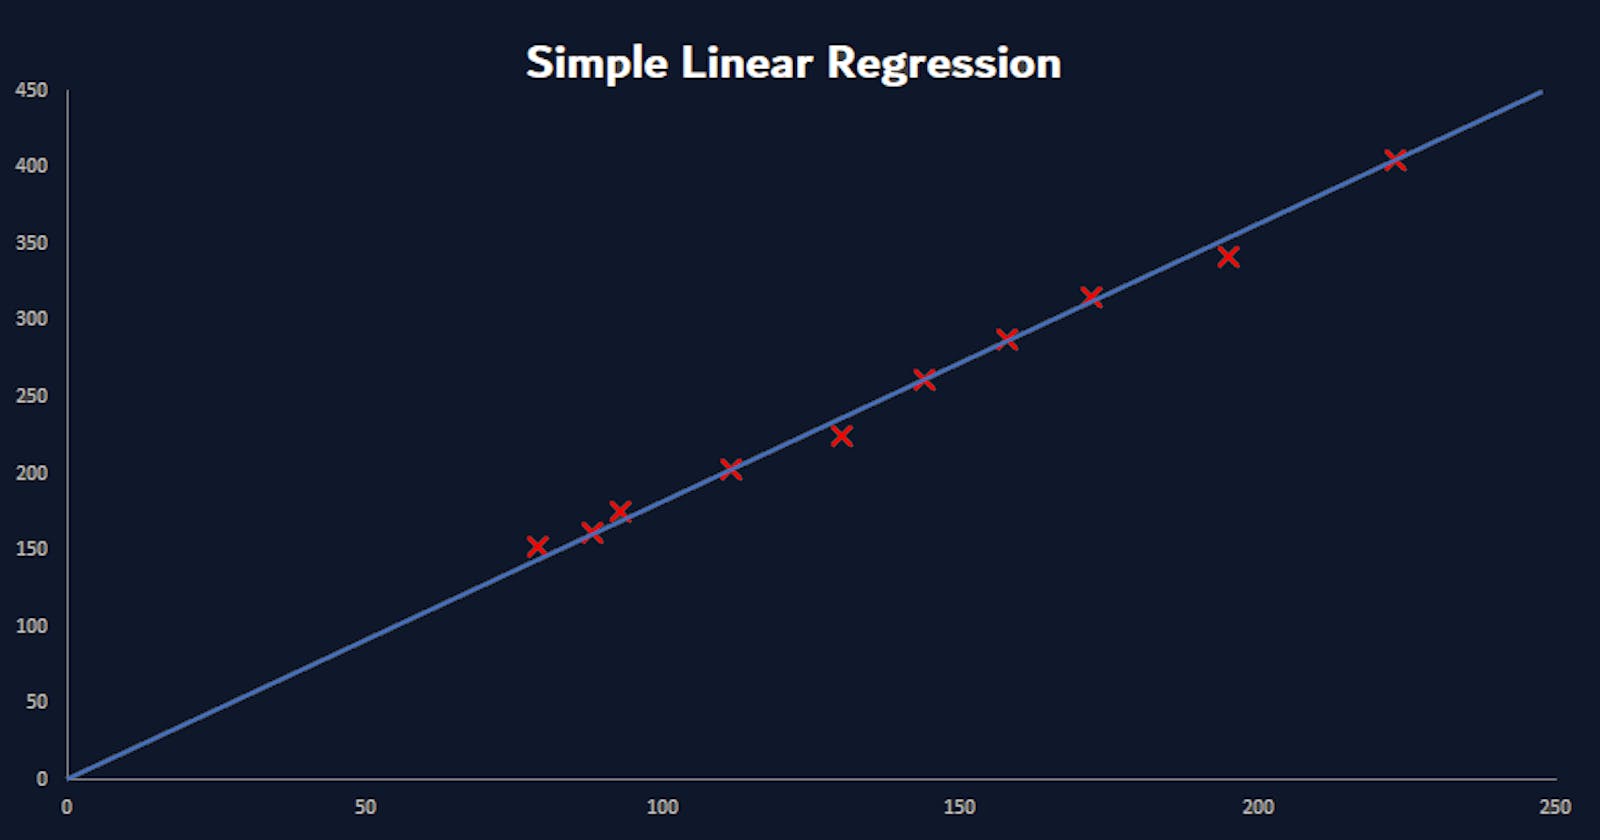 Supervised Learning - Simple Linear Regression